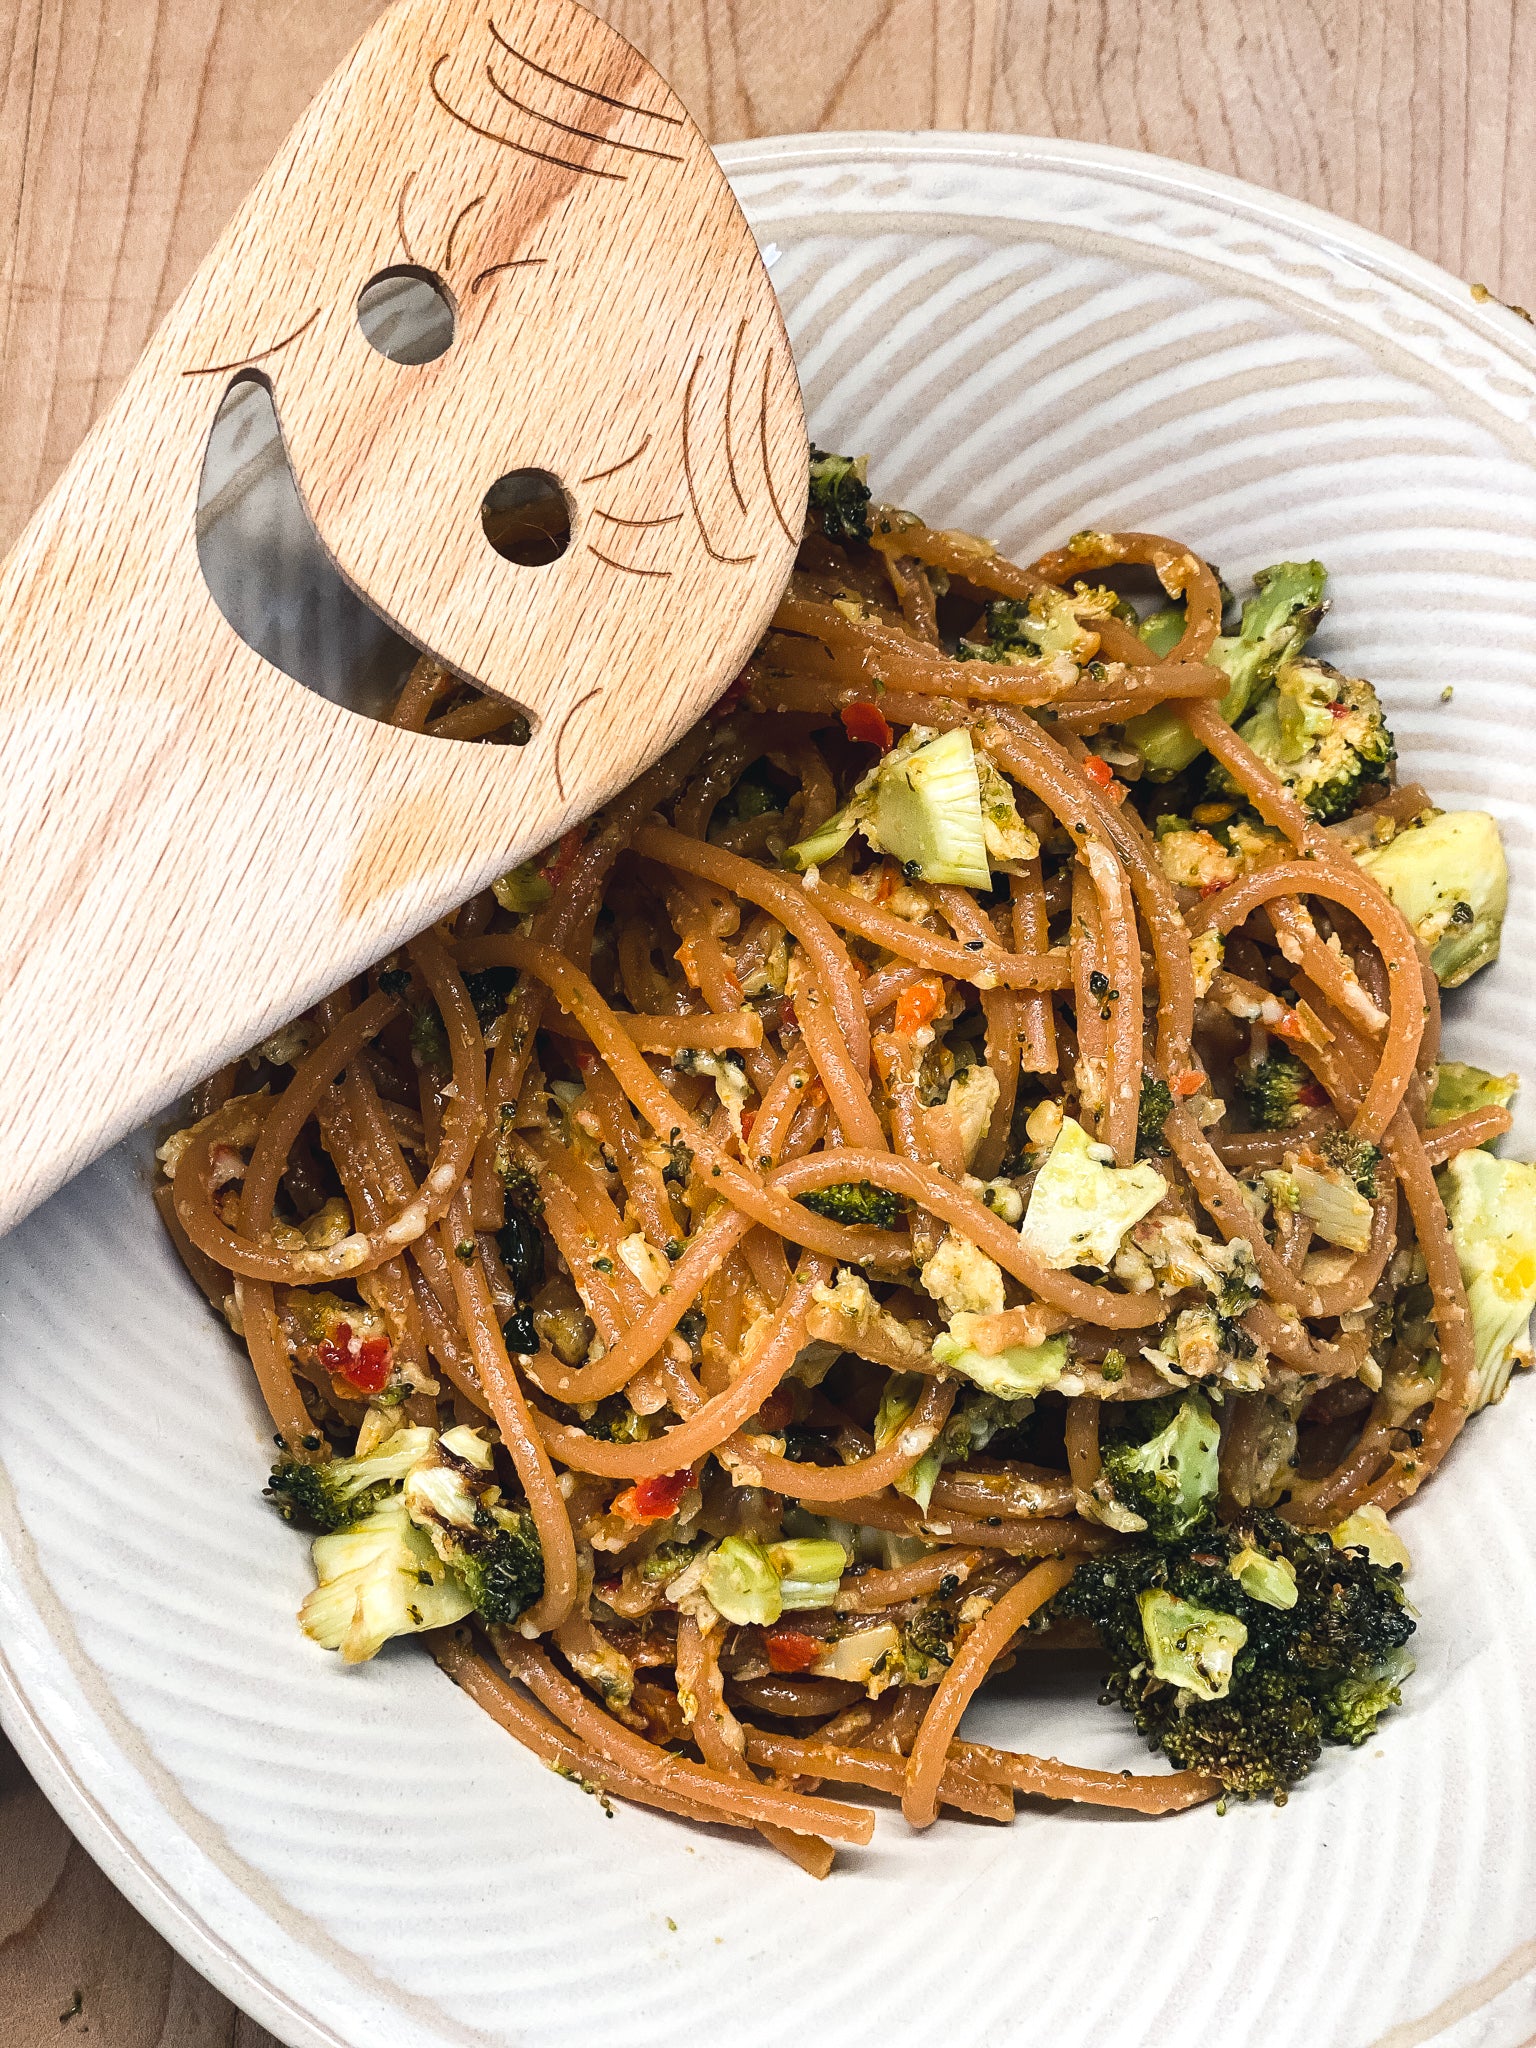 Red Lentil Pasta with Roasted Broccoli in Parmesan Artichoke Antipasto Bomba Sauce